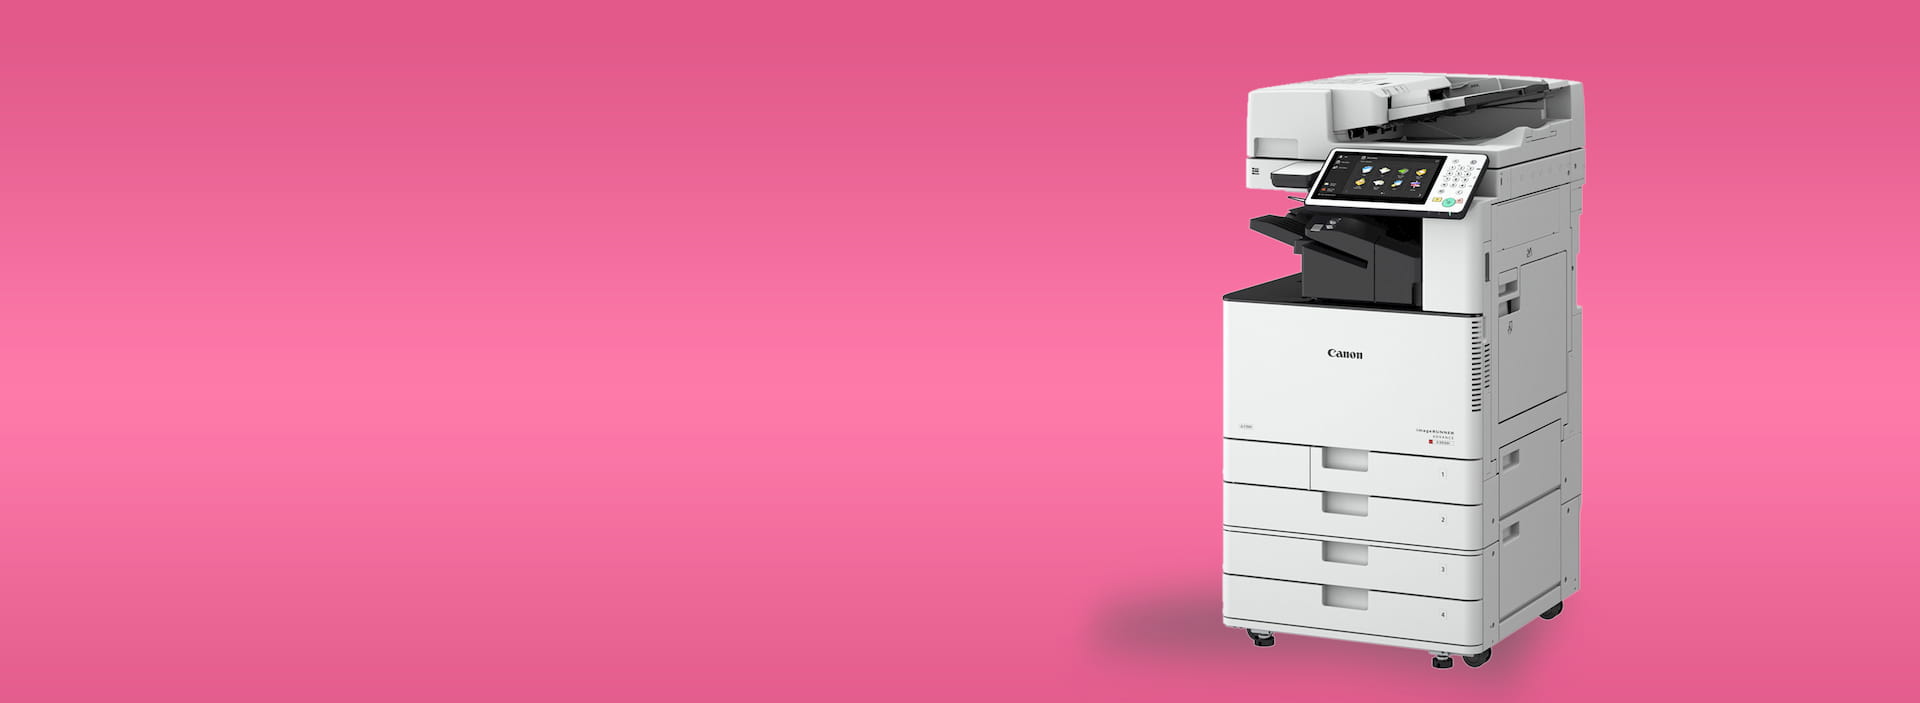 Photocopier Security: Protecting Sensitive Information In The Digital Age